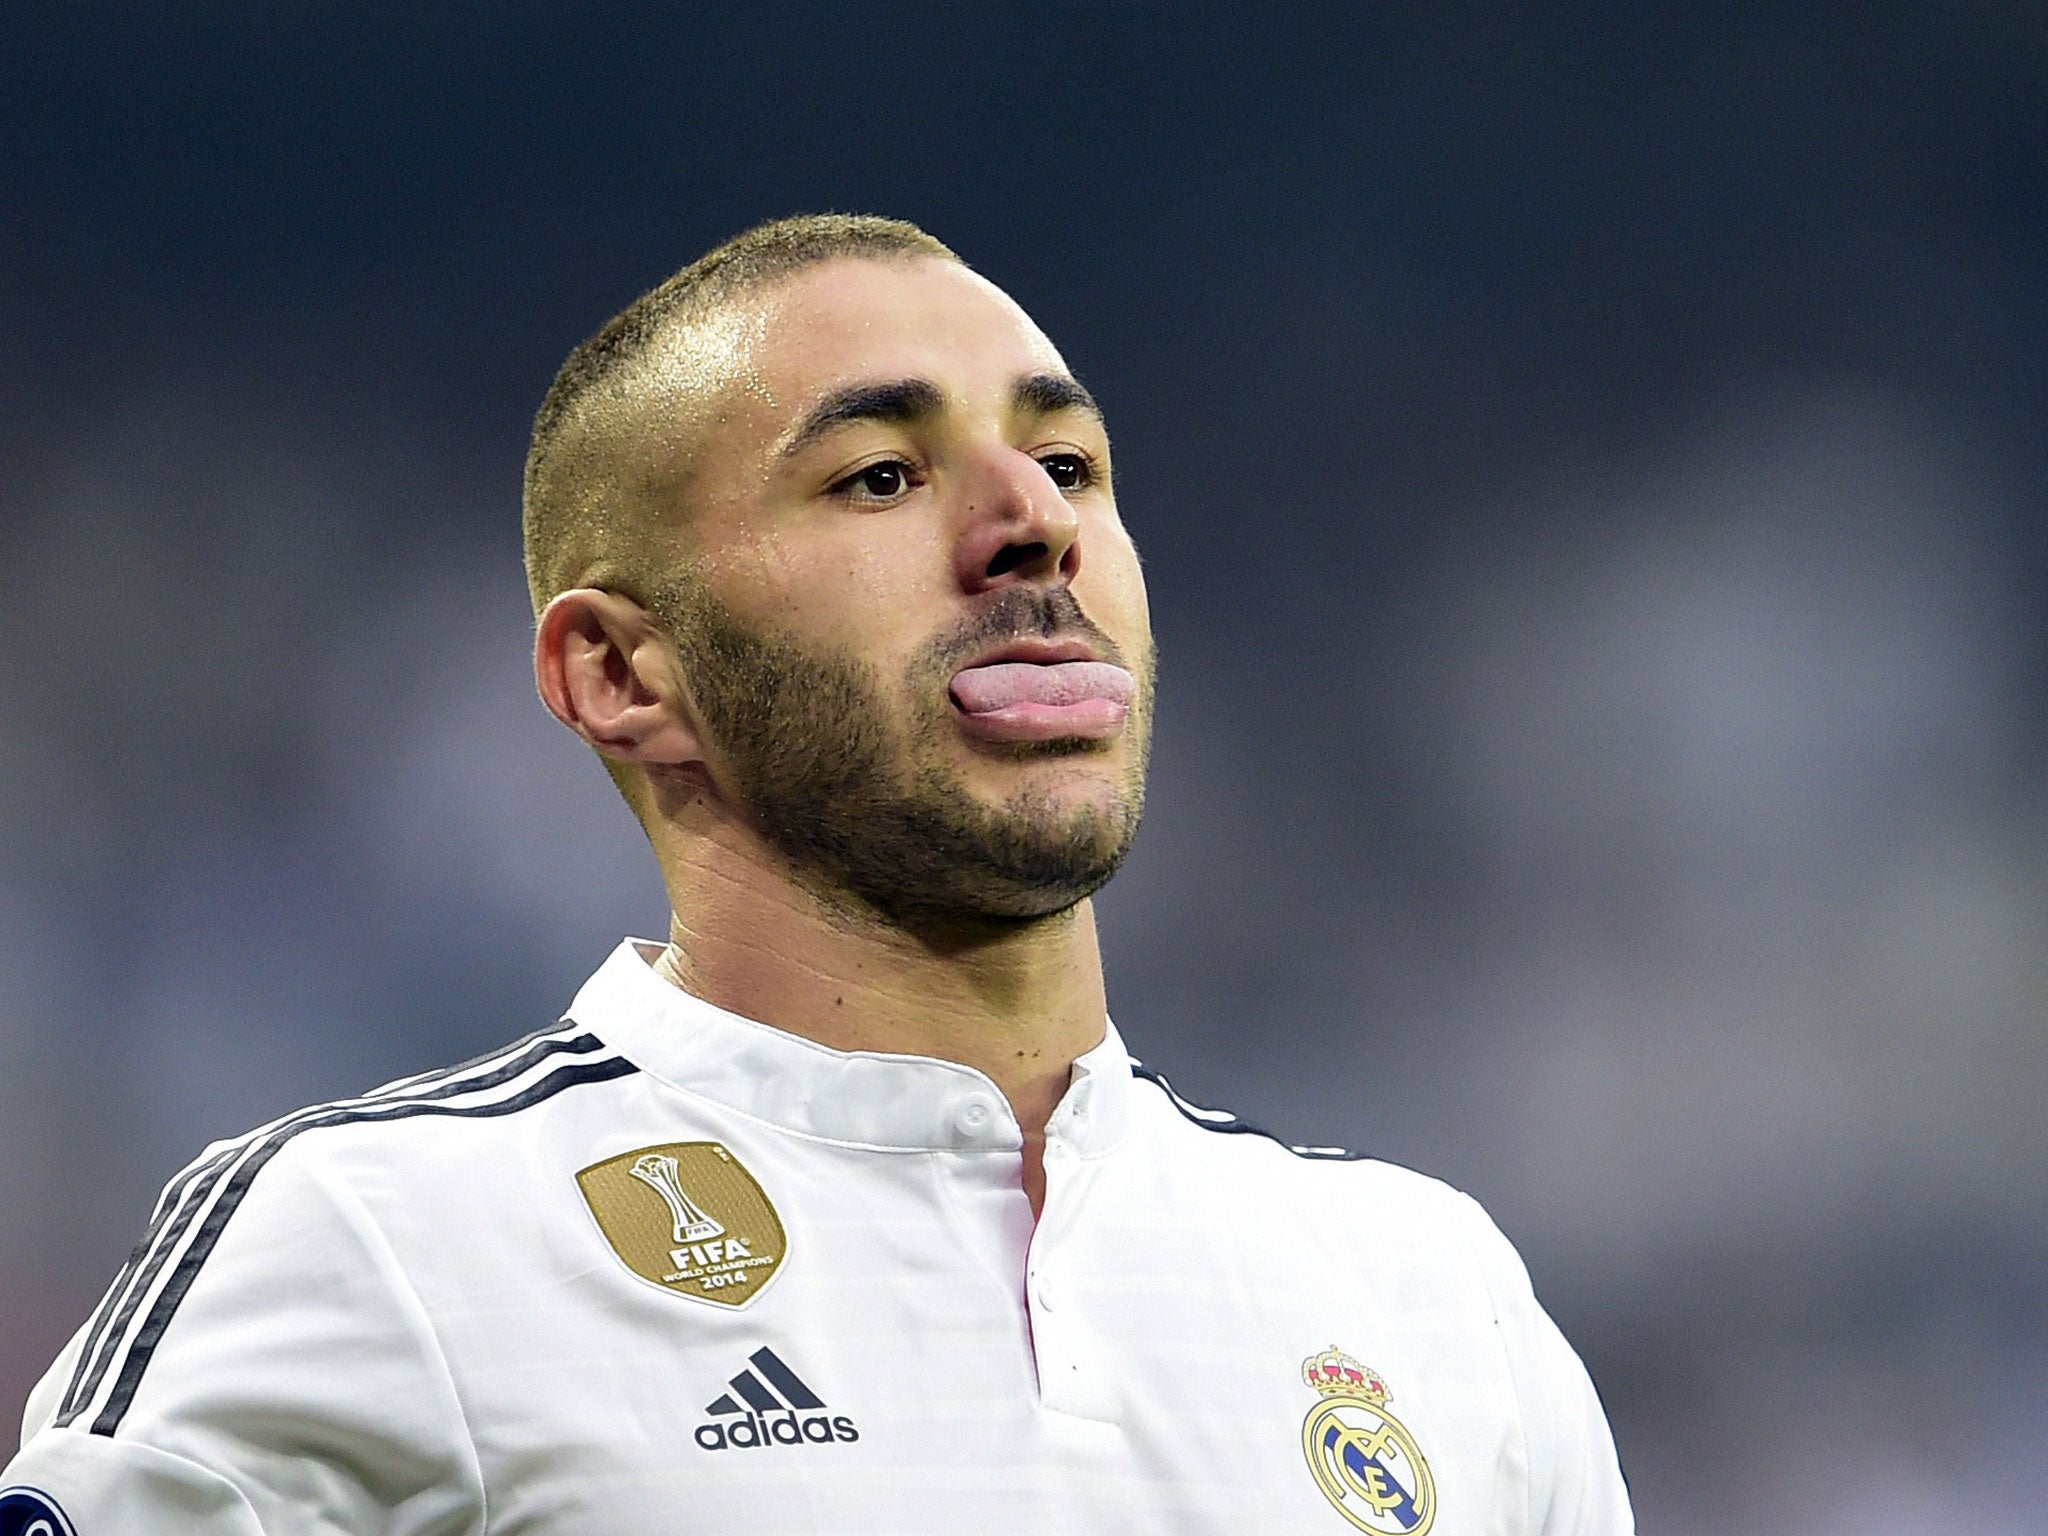 Karim Benzema has been linked with Arsenal